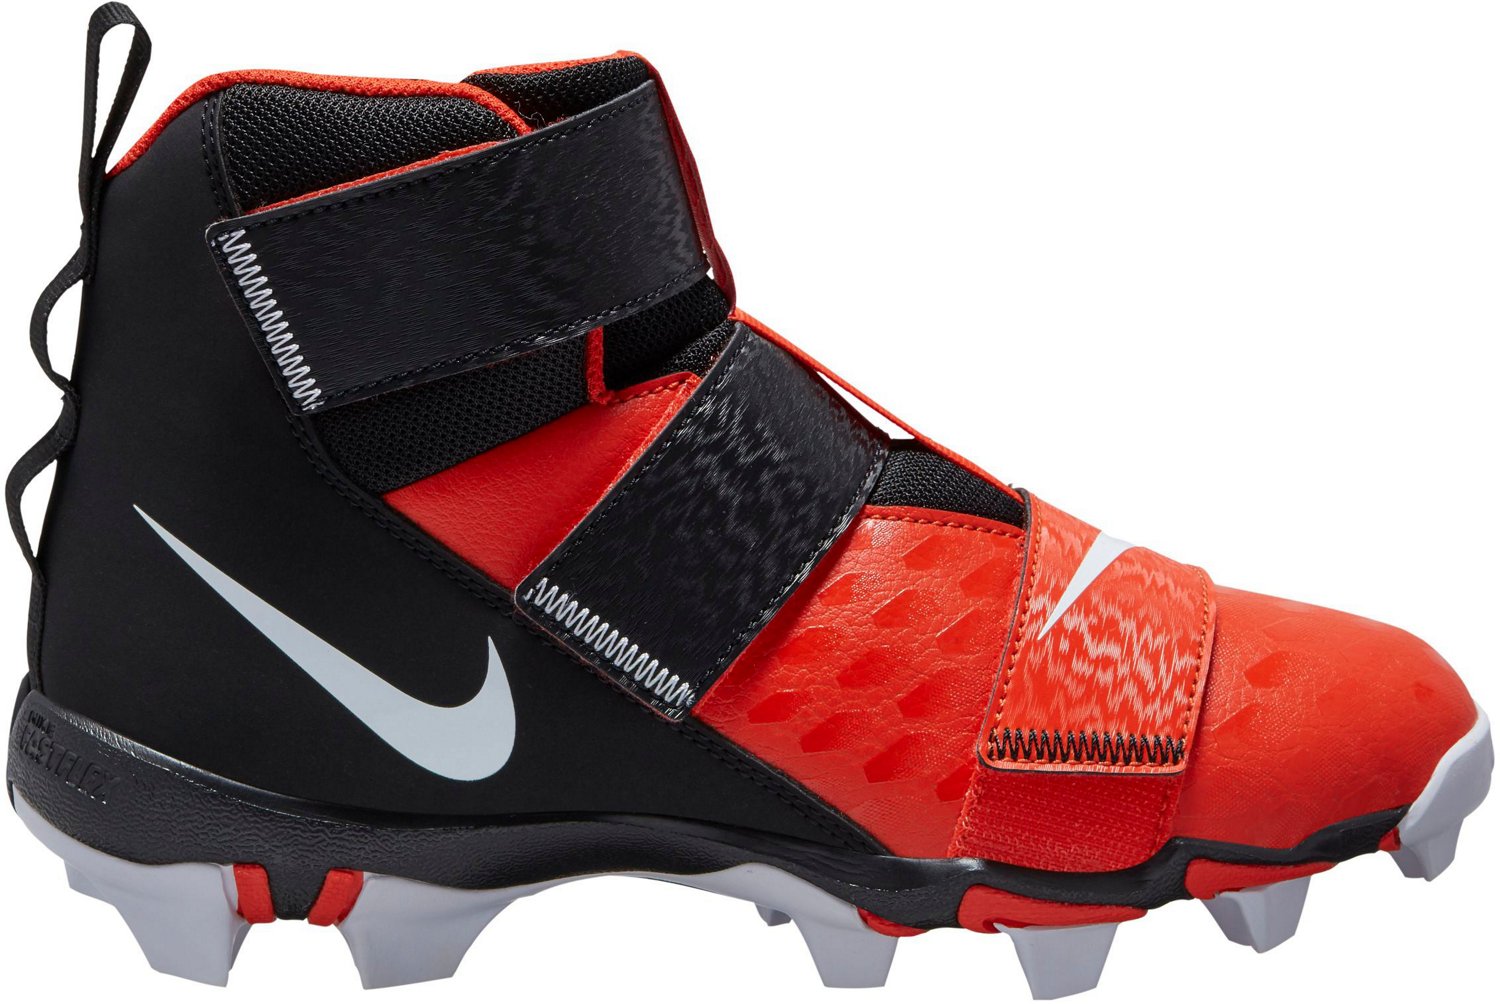 orange and black youth football cleats